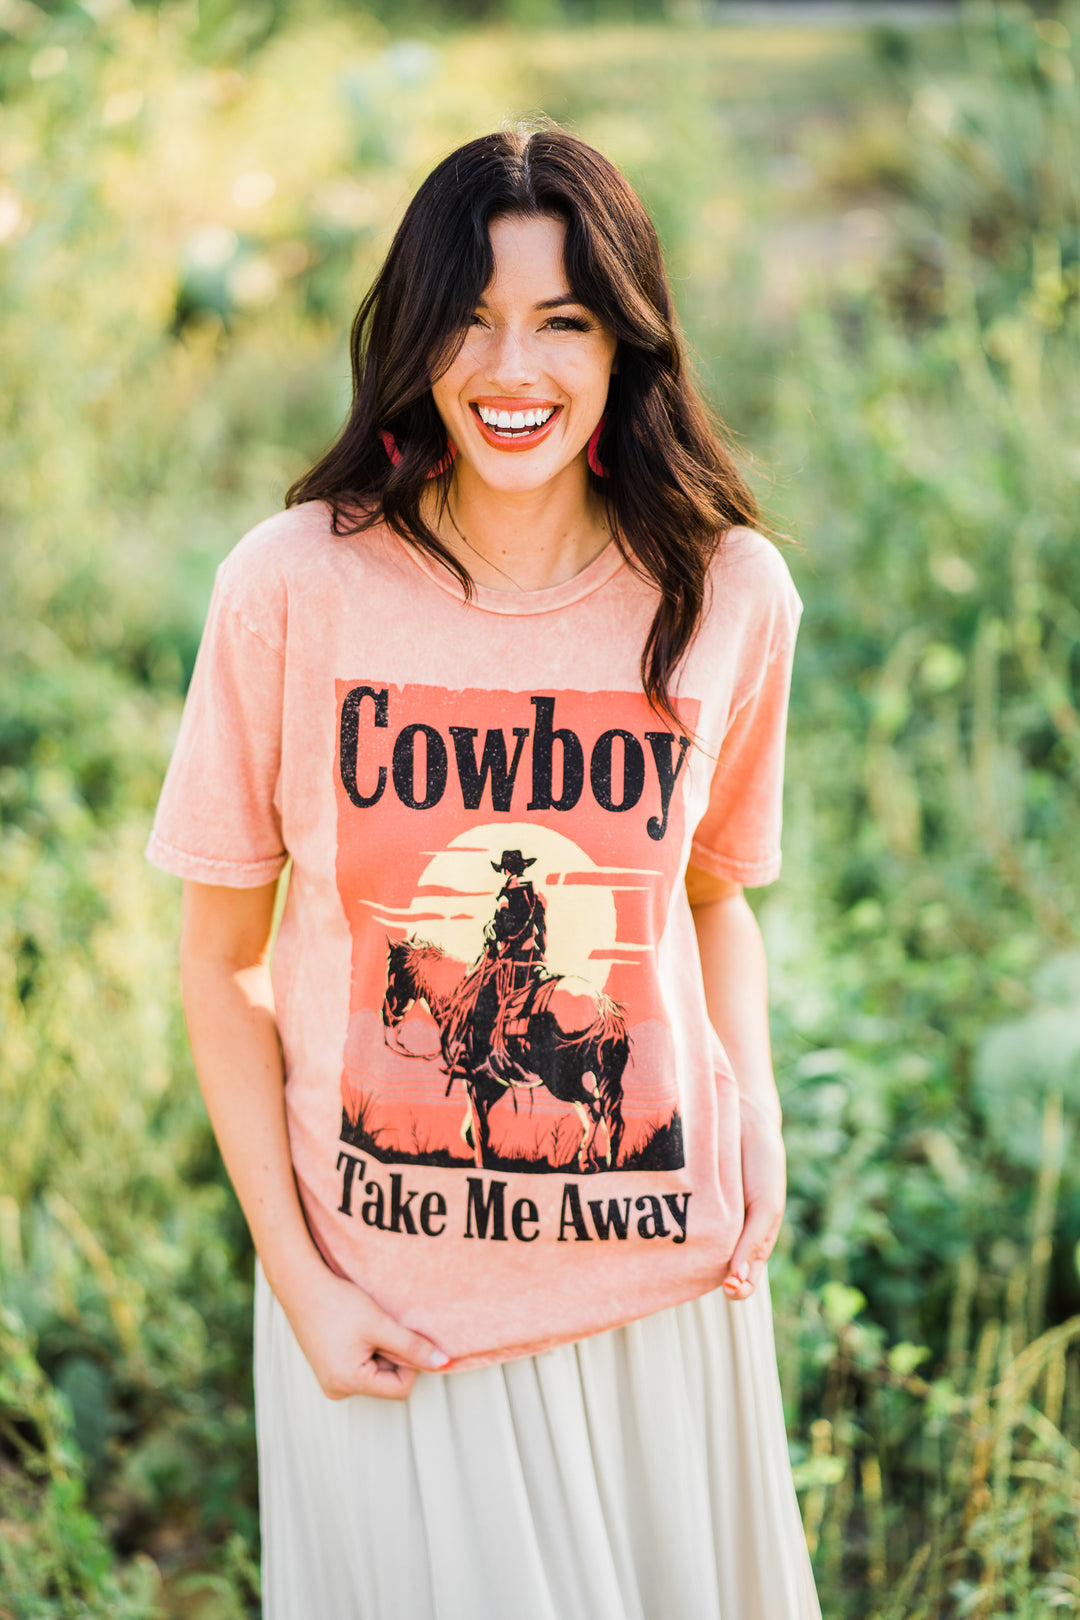 Cowboy Take Me Away T-shirt For Sale - Fashion Clothing | Middle West Apparel